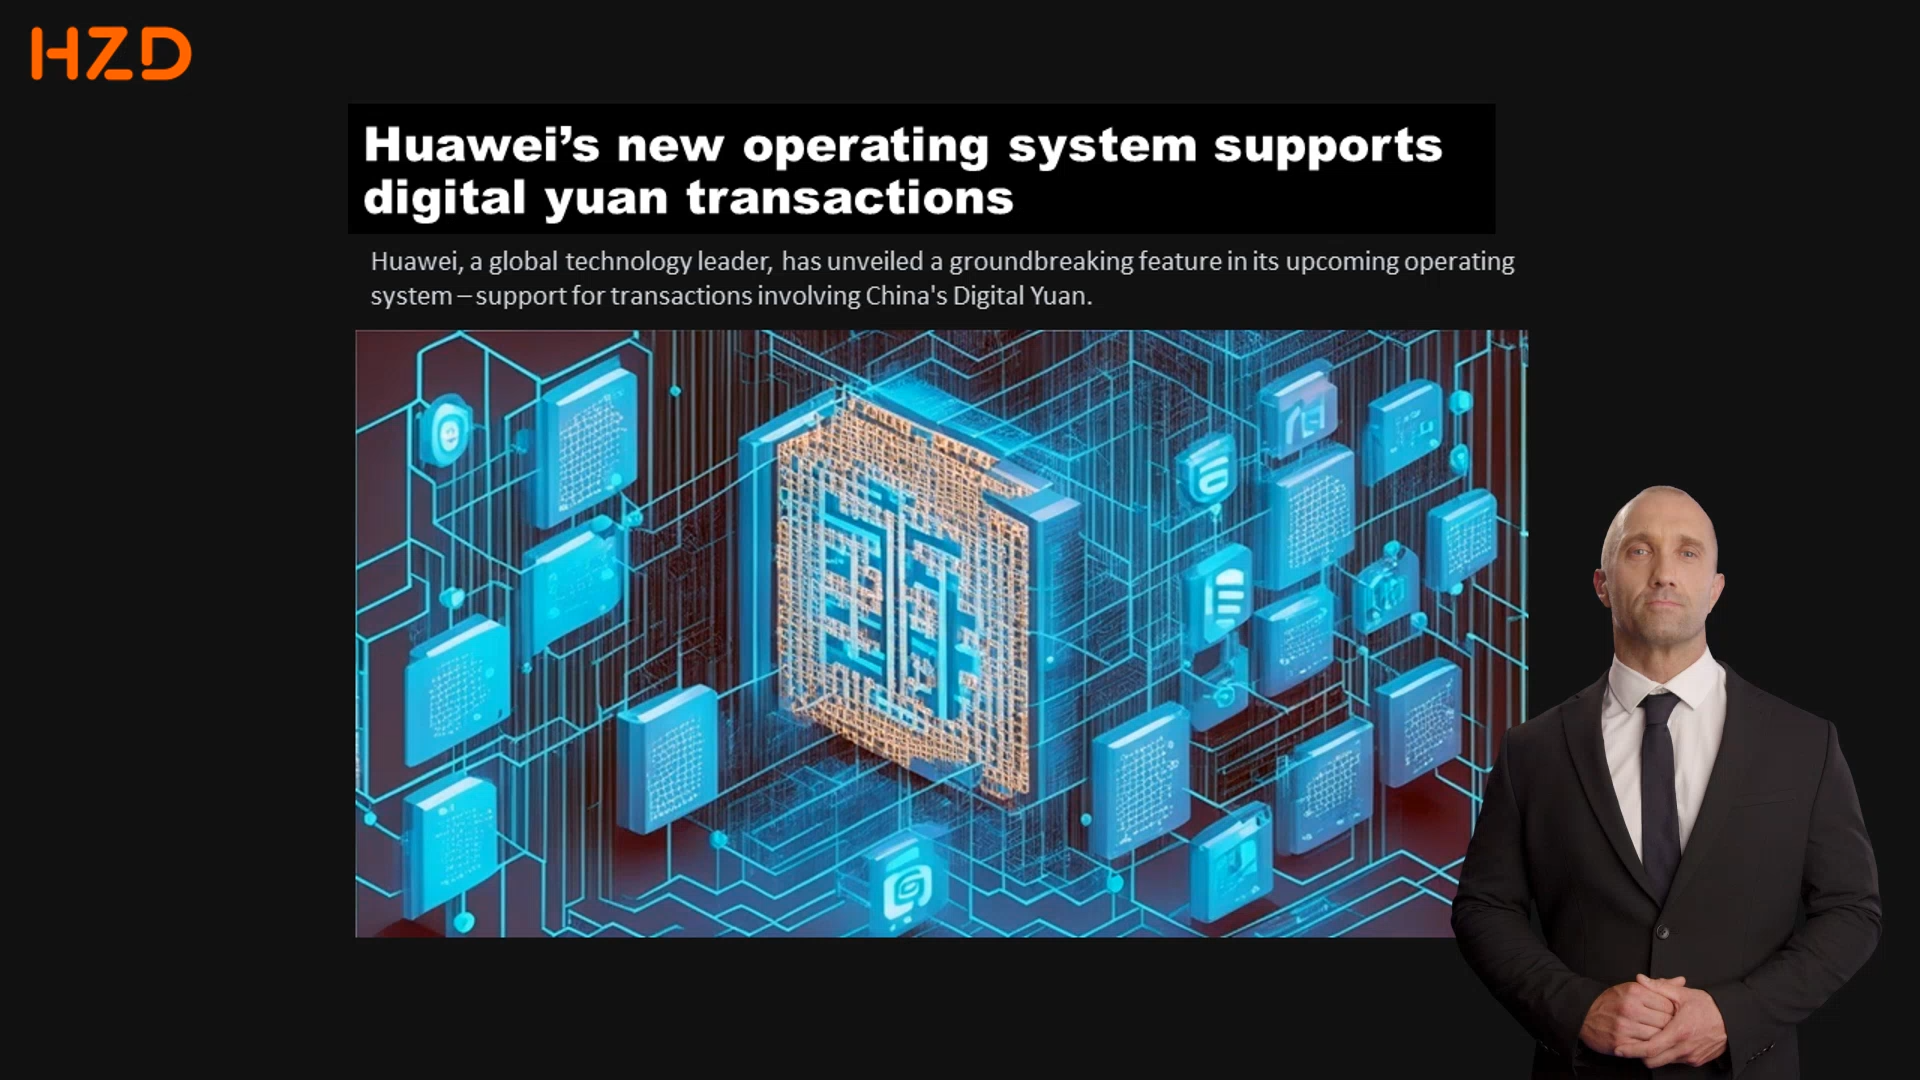 Huawei’s new operating system supports digital yuan transactions